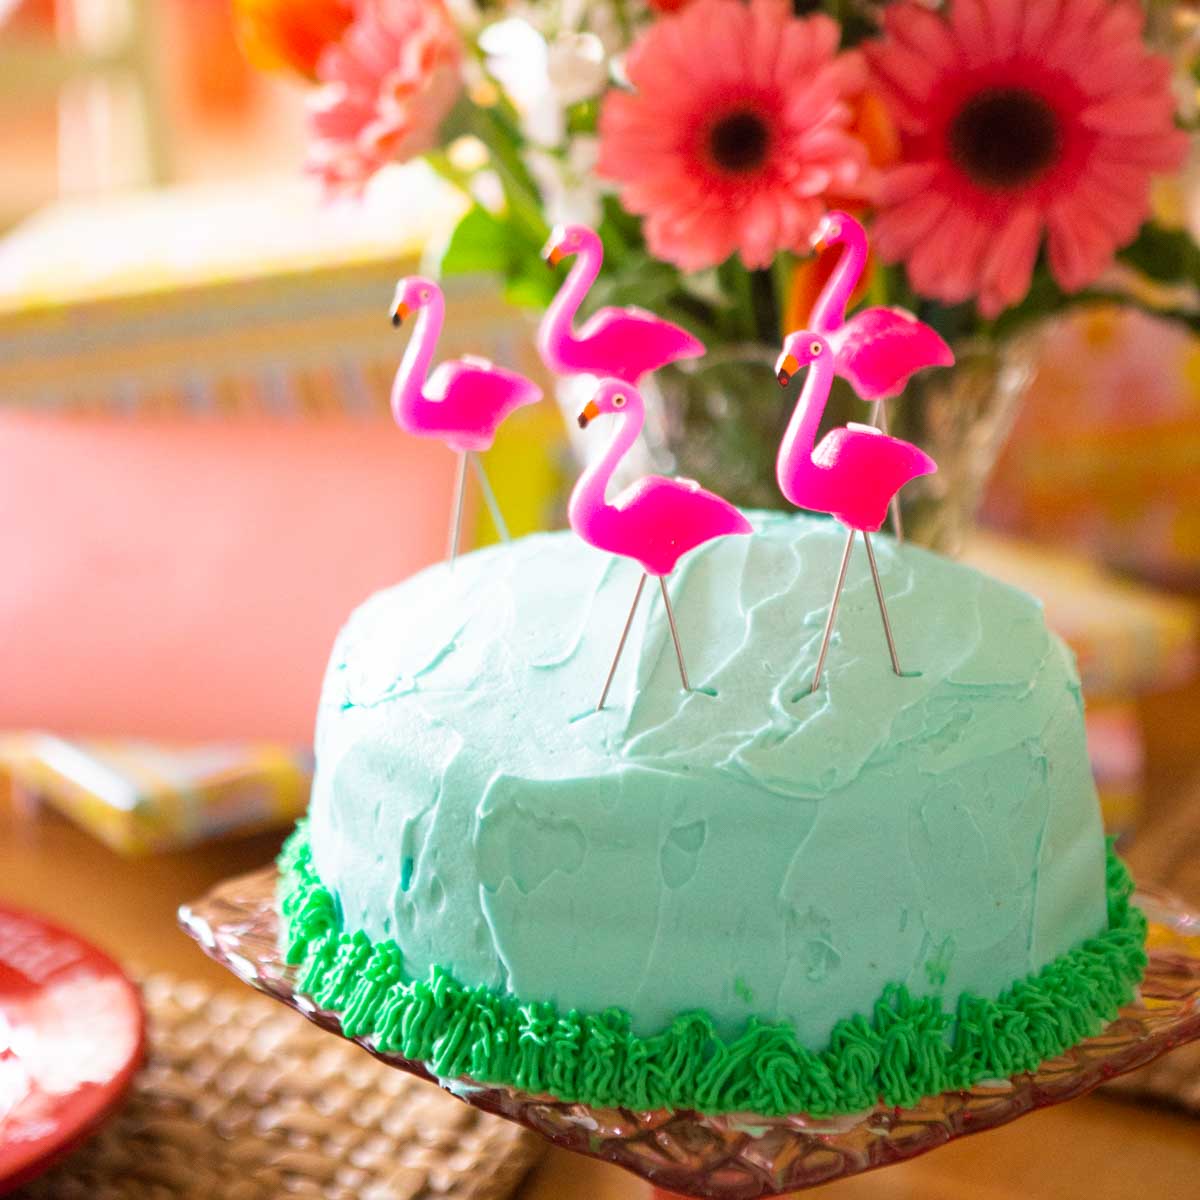 A blue birthday cake has pink flamingo candles on top.